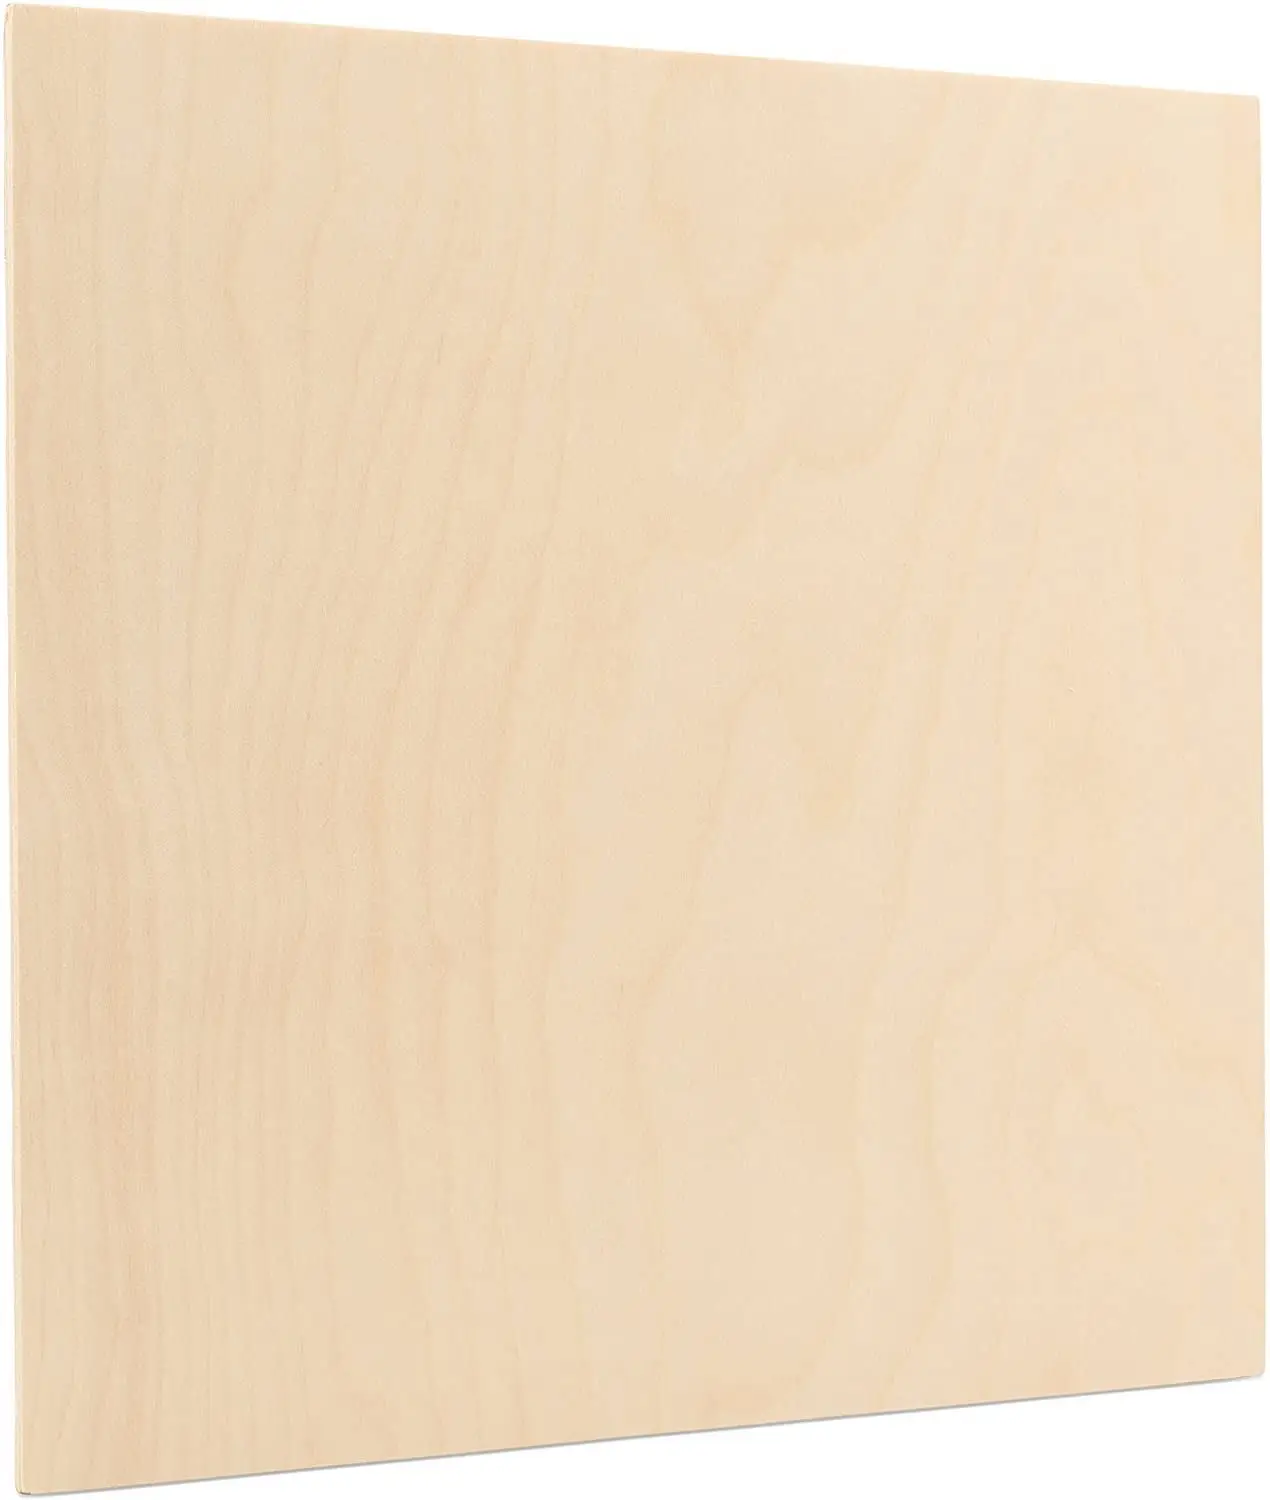  Baltic Birch Plywood, 3 mm 1/8 x 12 x 9 Inch Craft Wood, Bag of  8 B/BB Grade Baltic Birch Sheets, Perfect for Laser, CNC Cutting and Wood  Burning, by Woodpeckers 